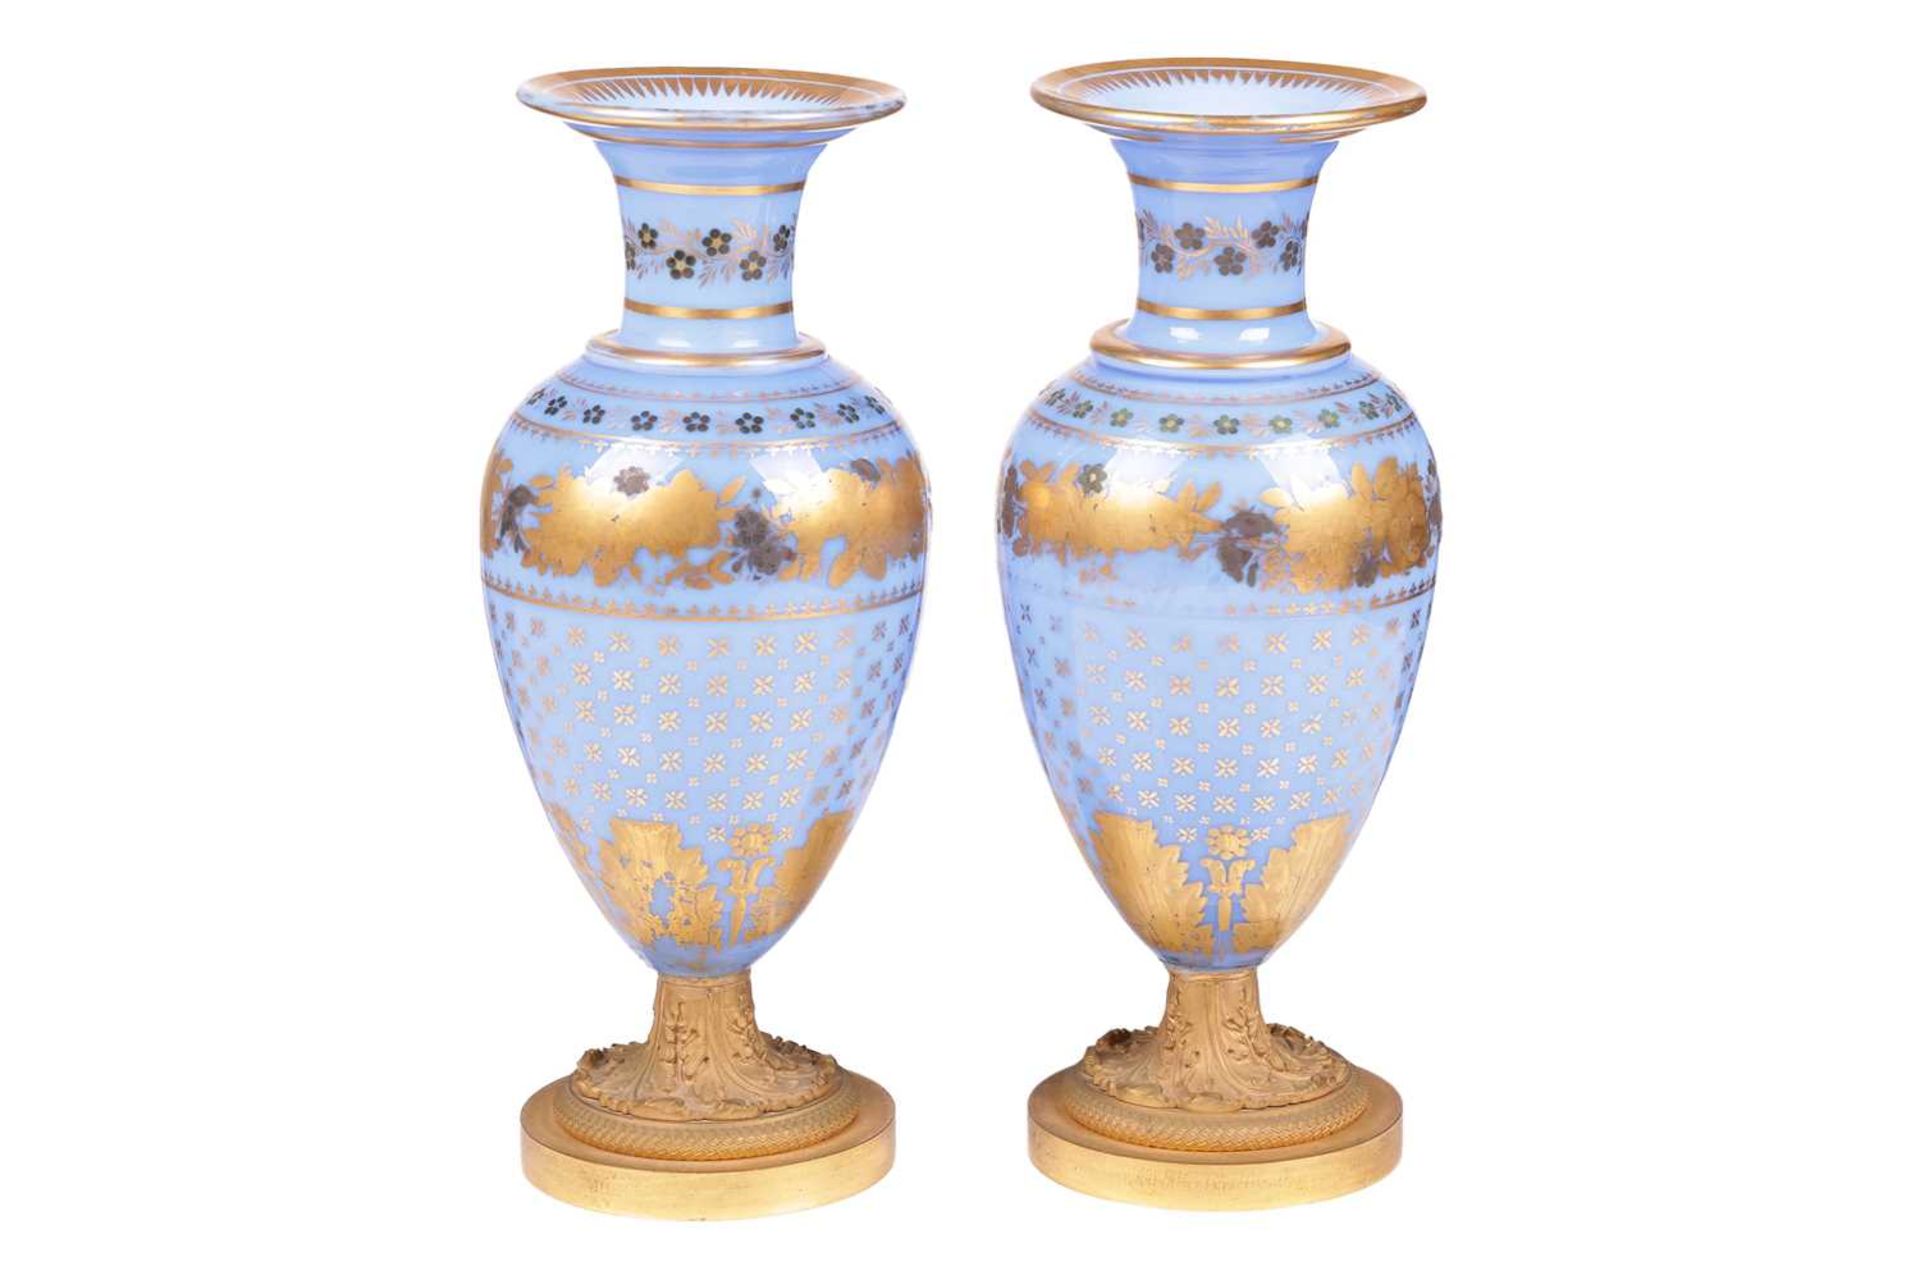 A pair of late 19th century French blue opaline glass and ormolu mounted vases, with gilt-overlaid d - Image 2 of 7